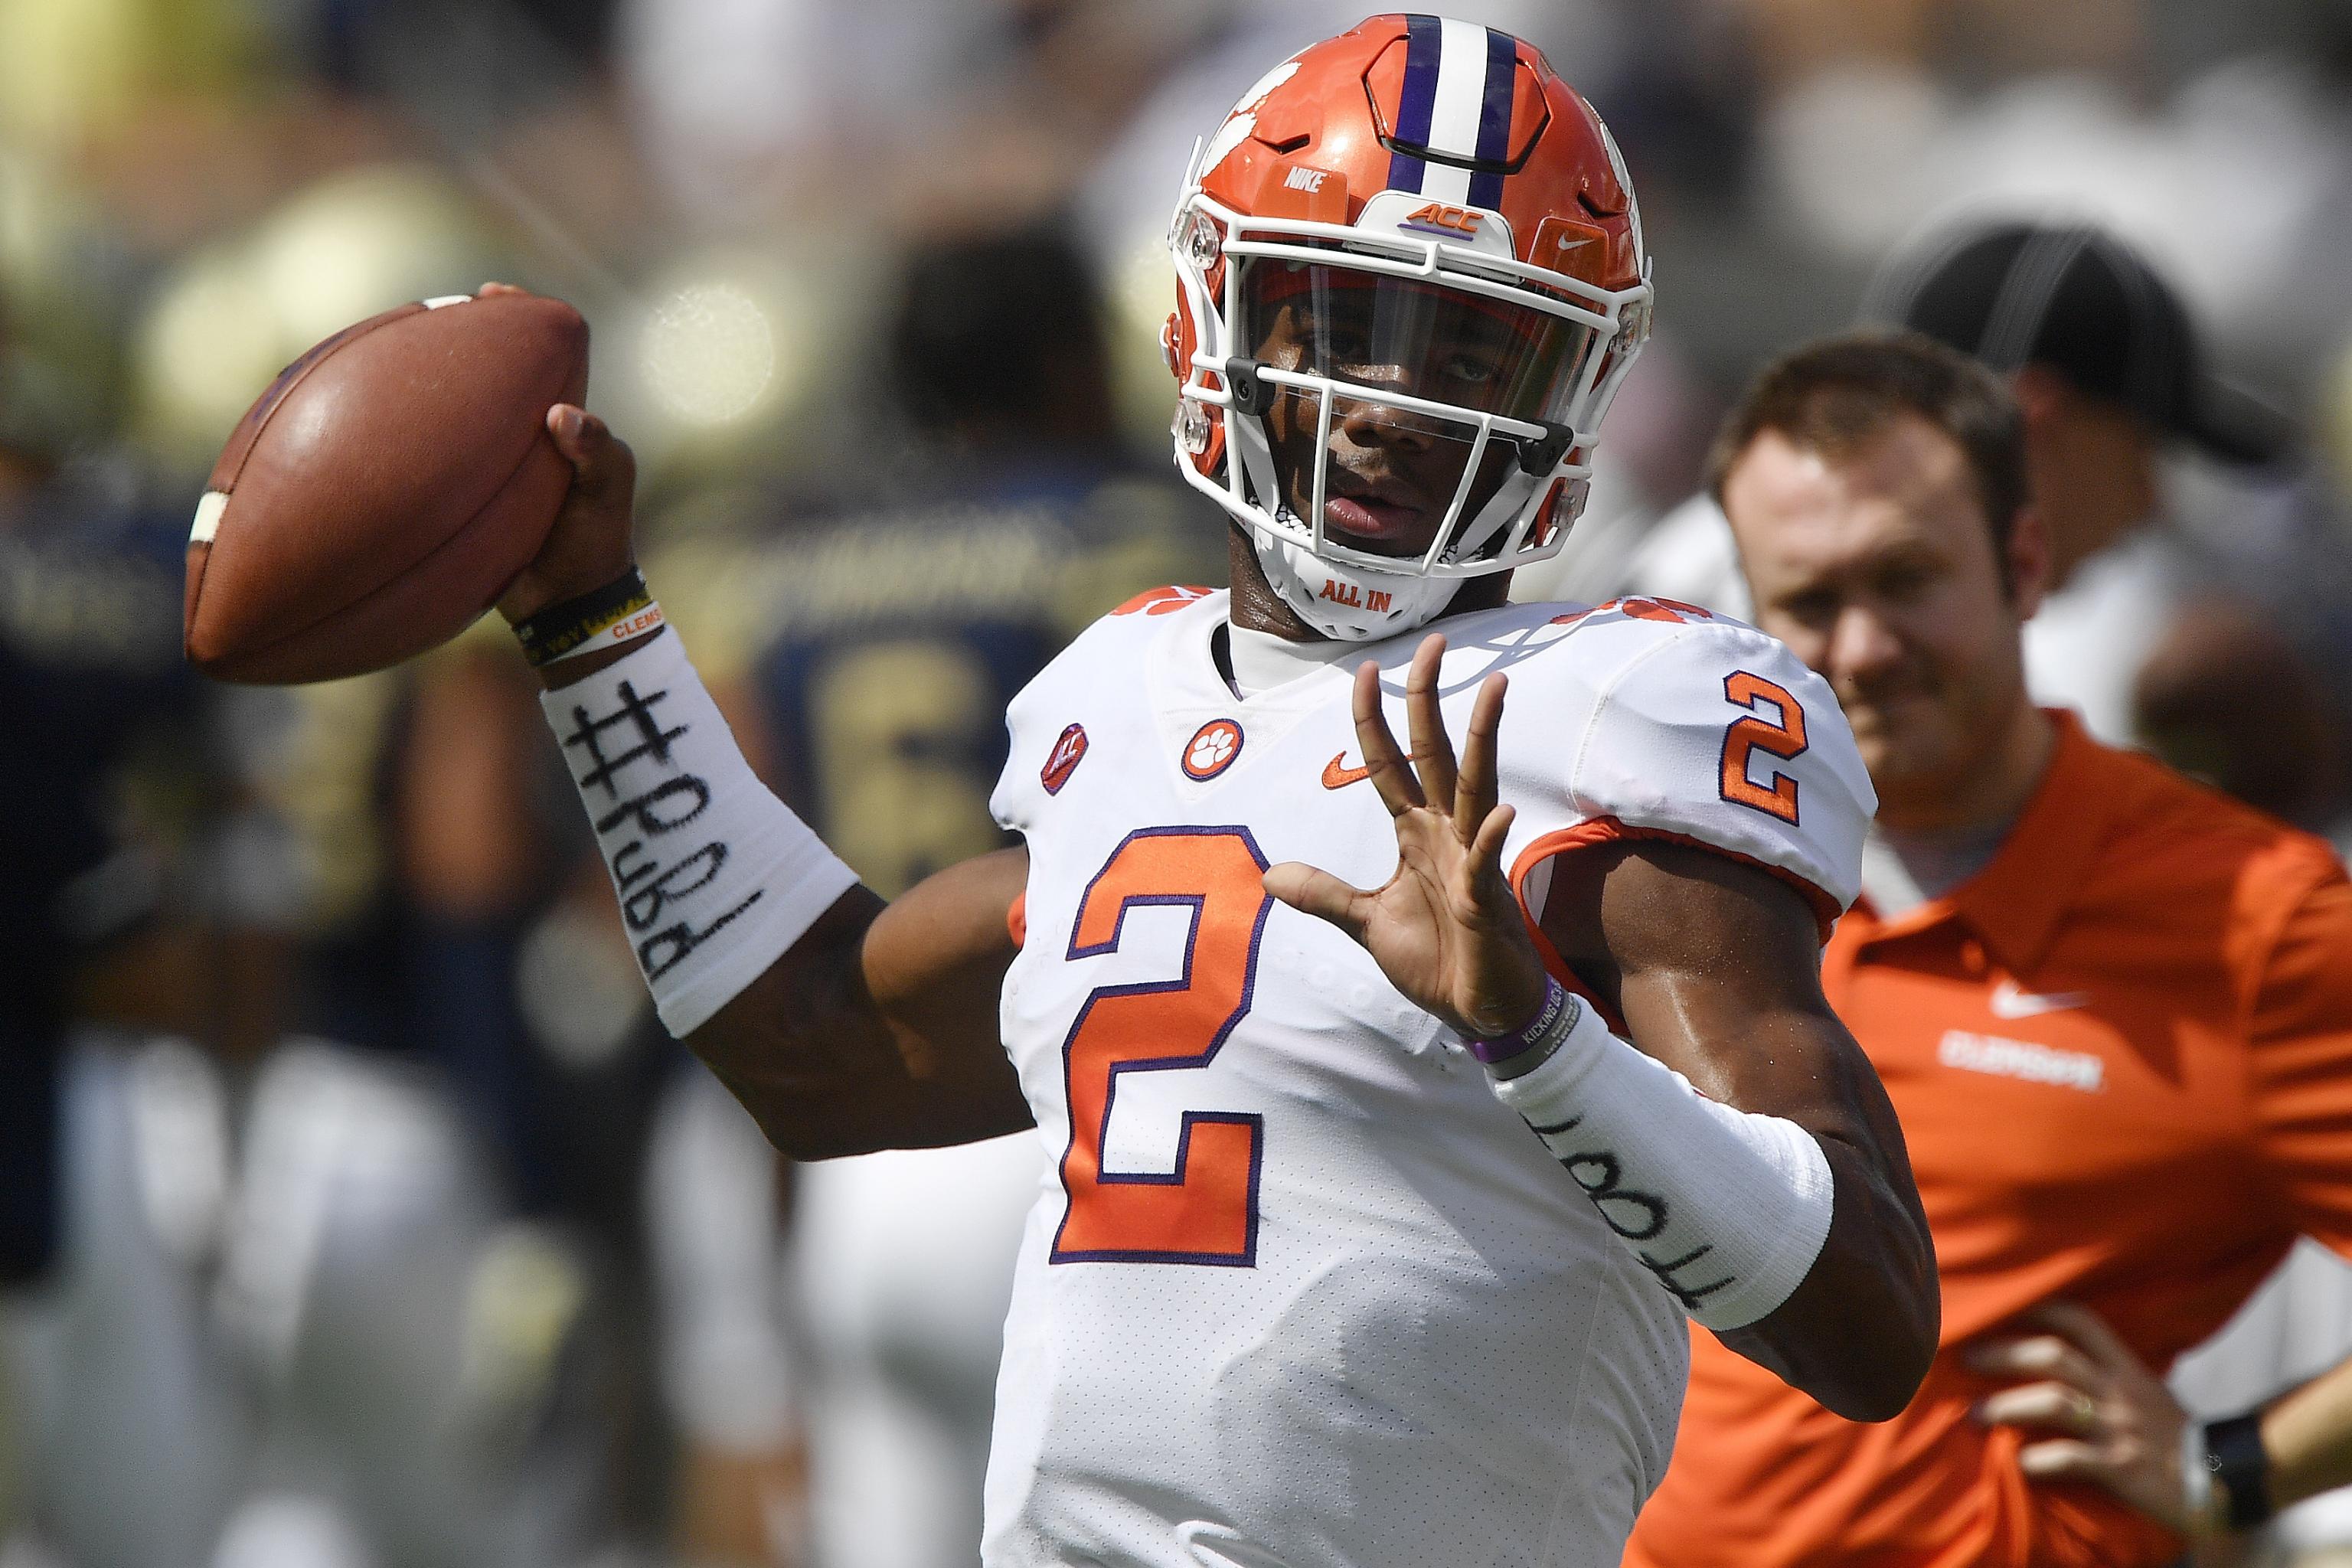 Clemson Qb Kelly Bryant To Transfer After Being Replaced By Trevor